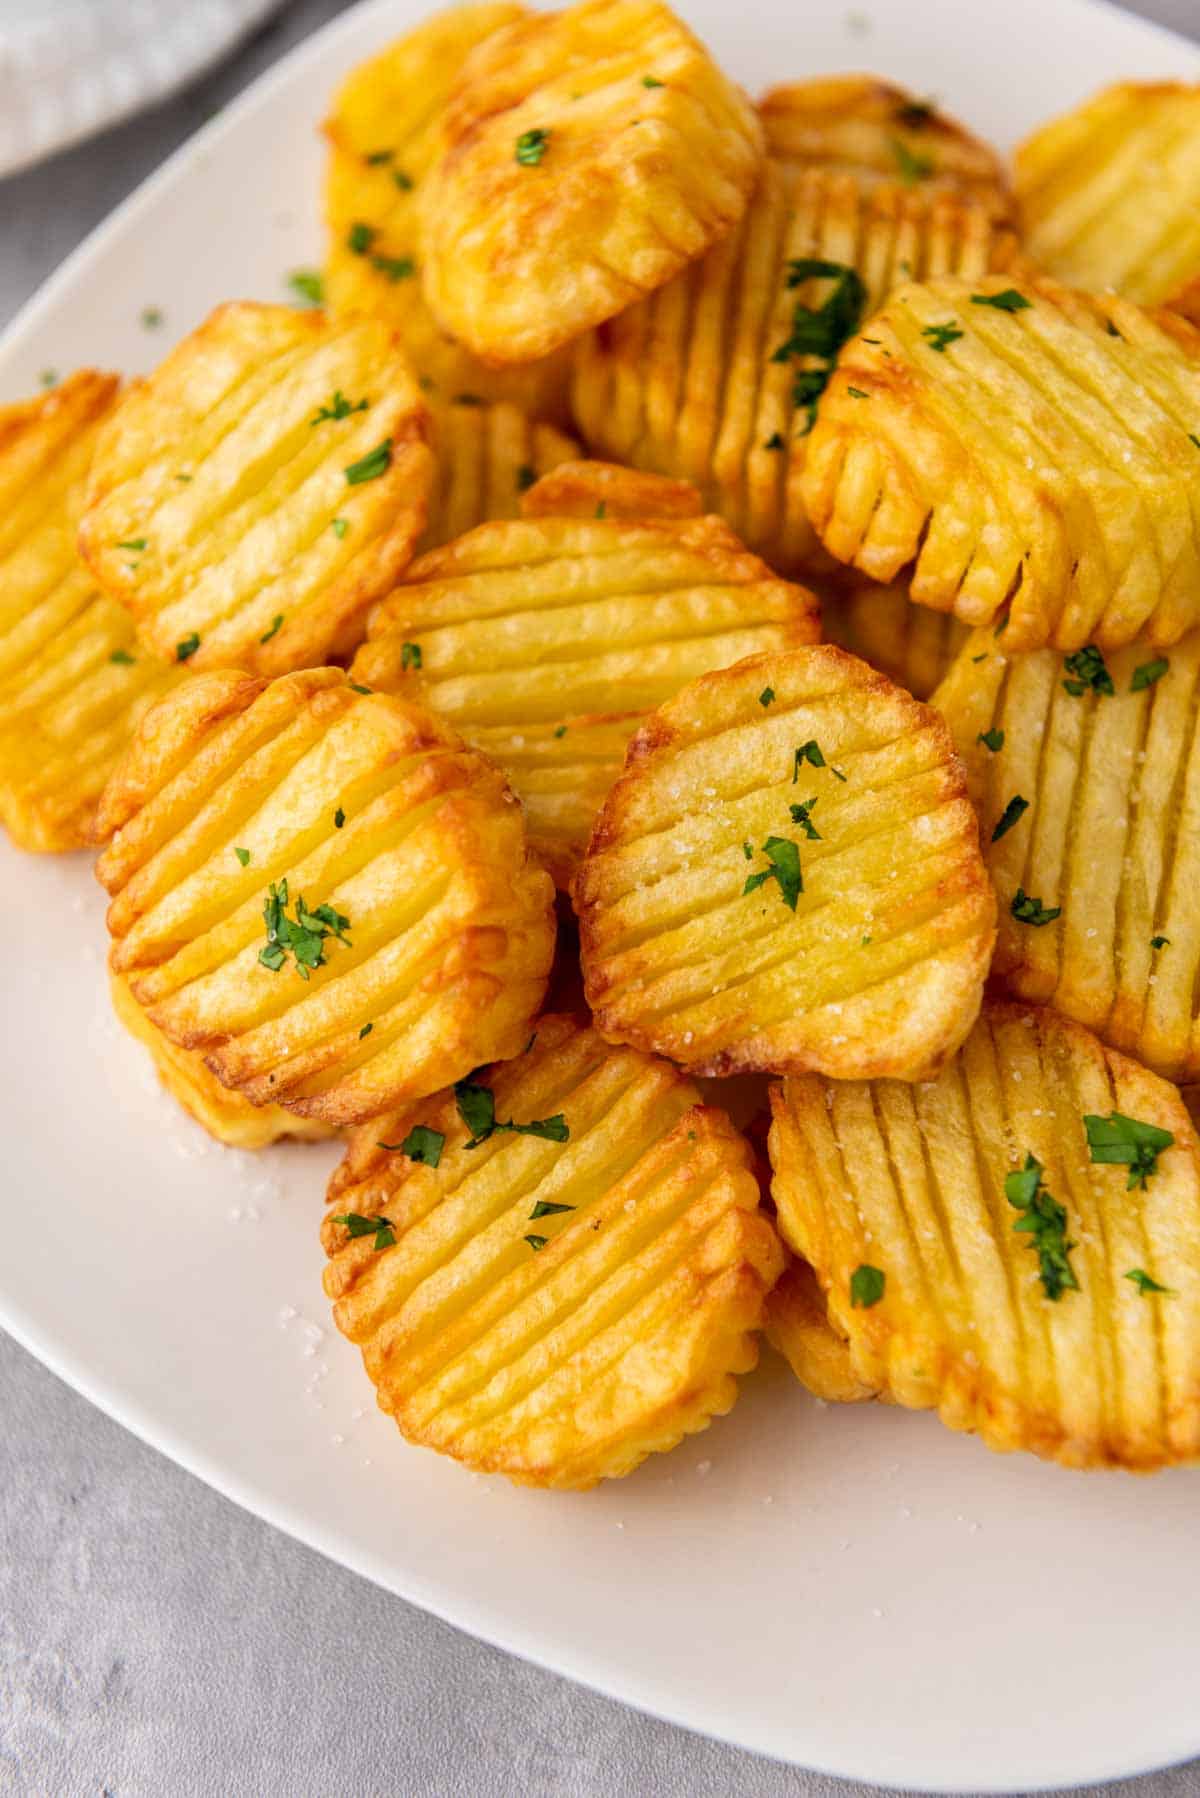 Crispy accordion potatoes served on a plate with a hint of parsley.